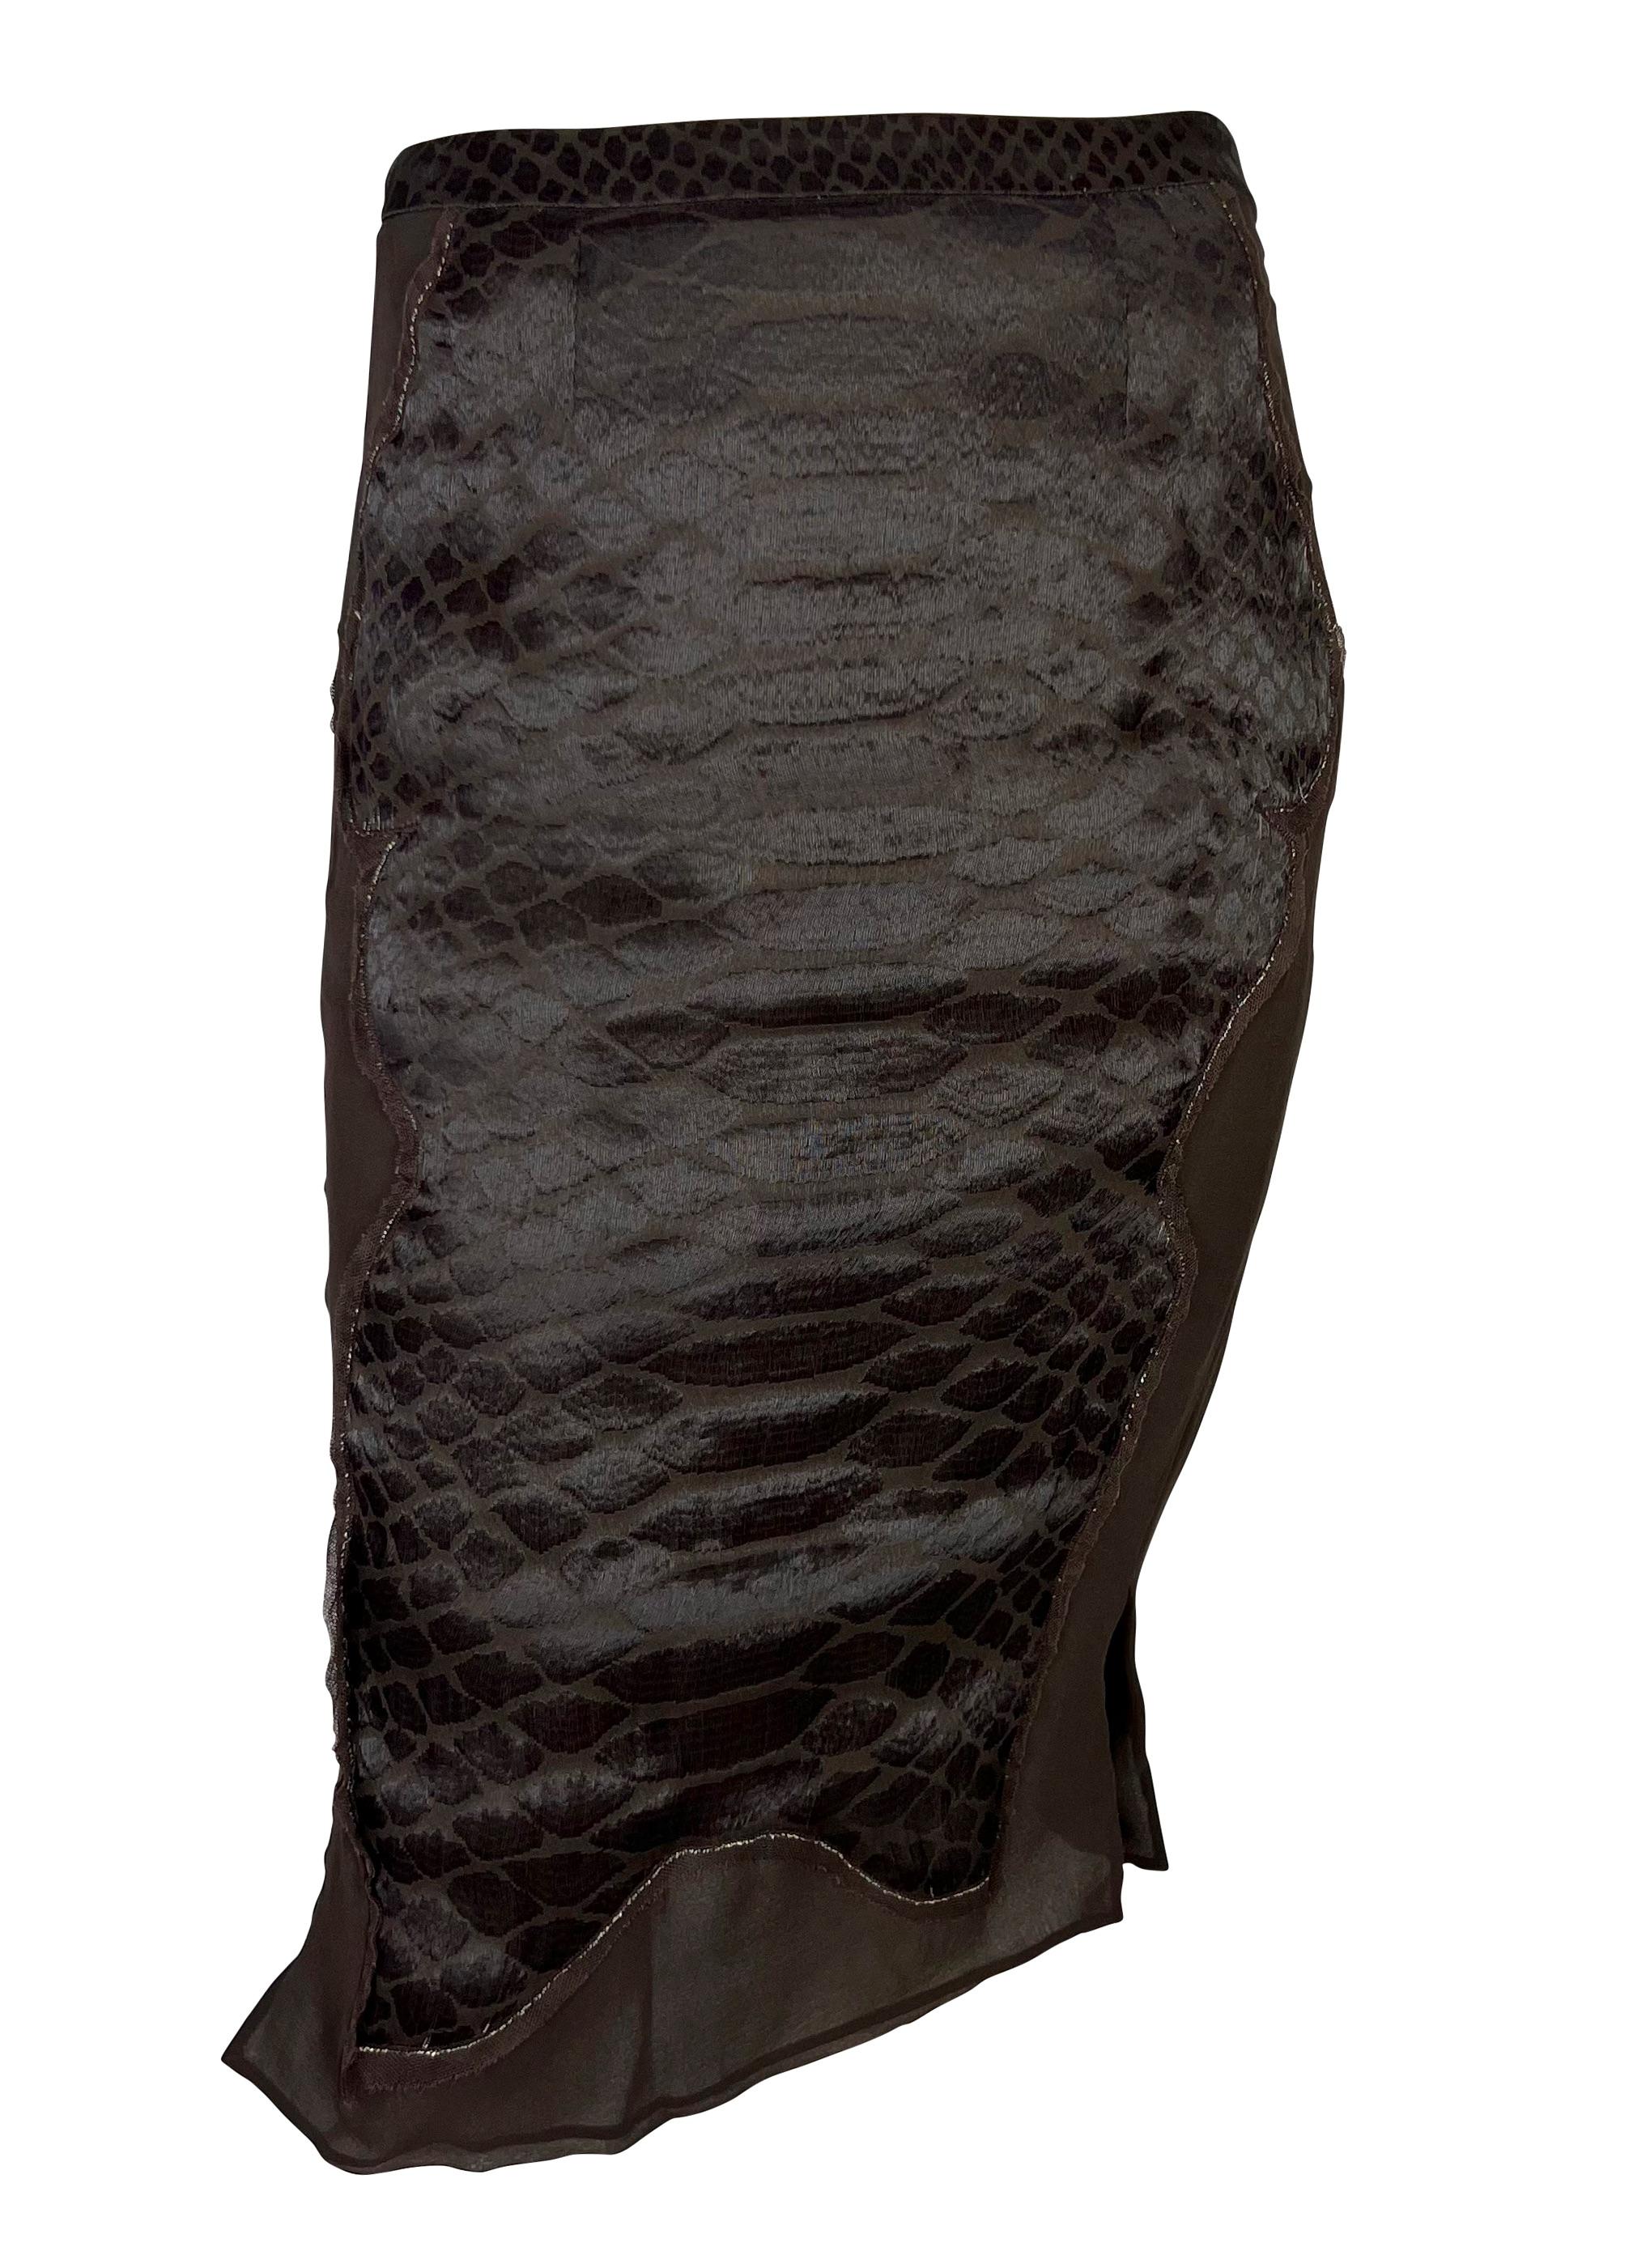 F/W 2004 Yves Saint Laurent by Tom Ford Sheer Brown Scale Chinoiserie Skirt For Sale